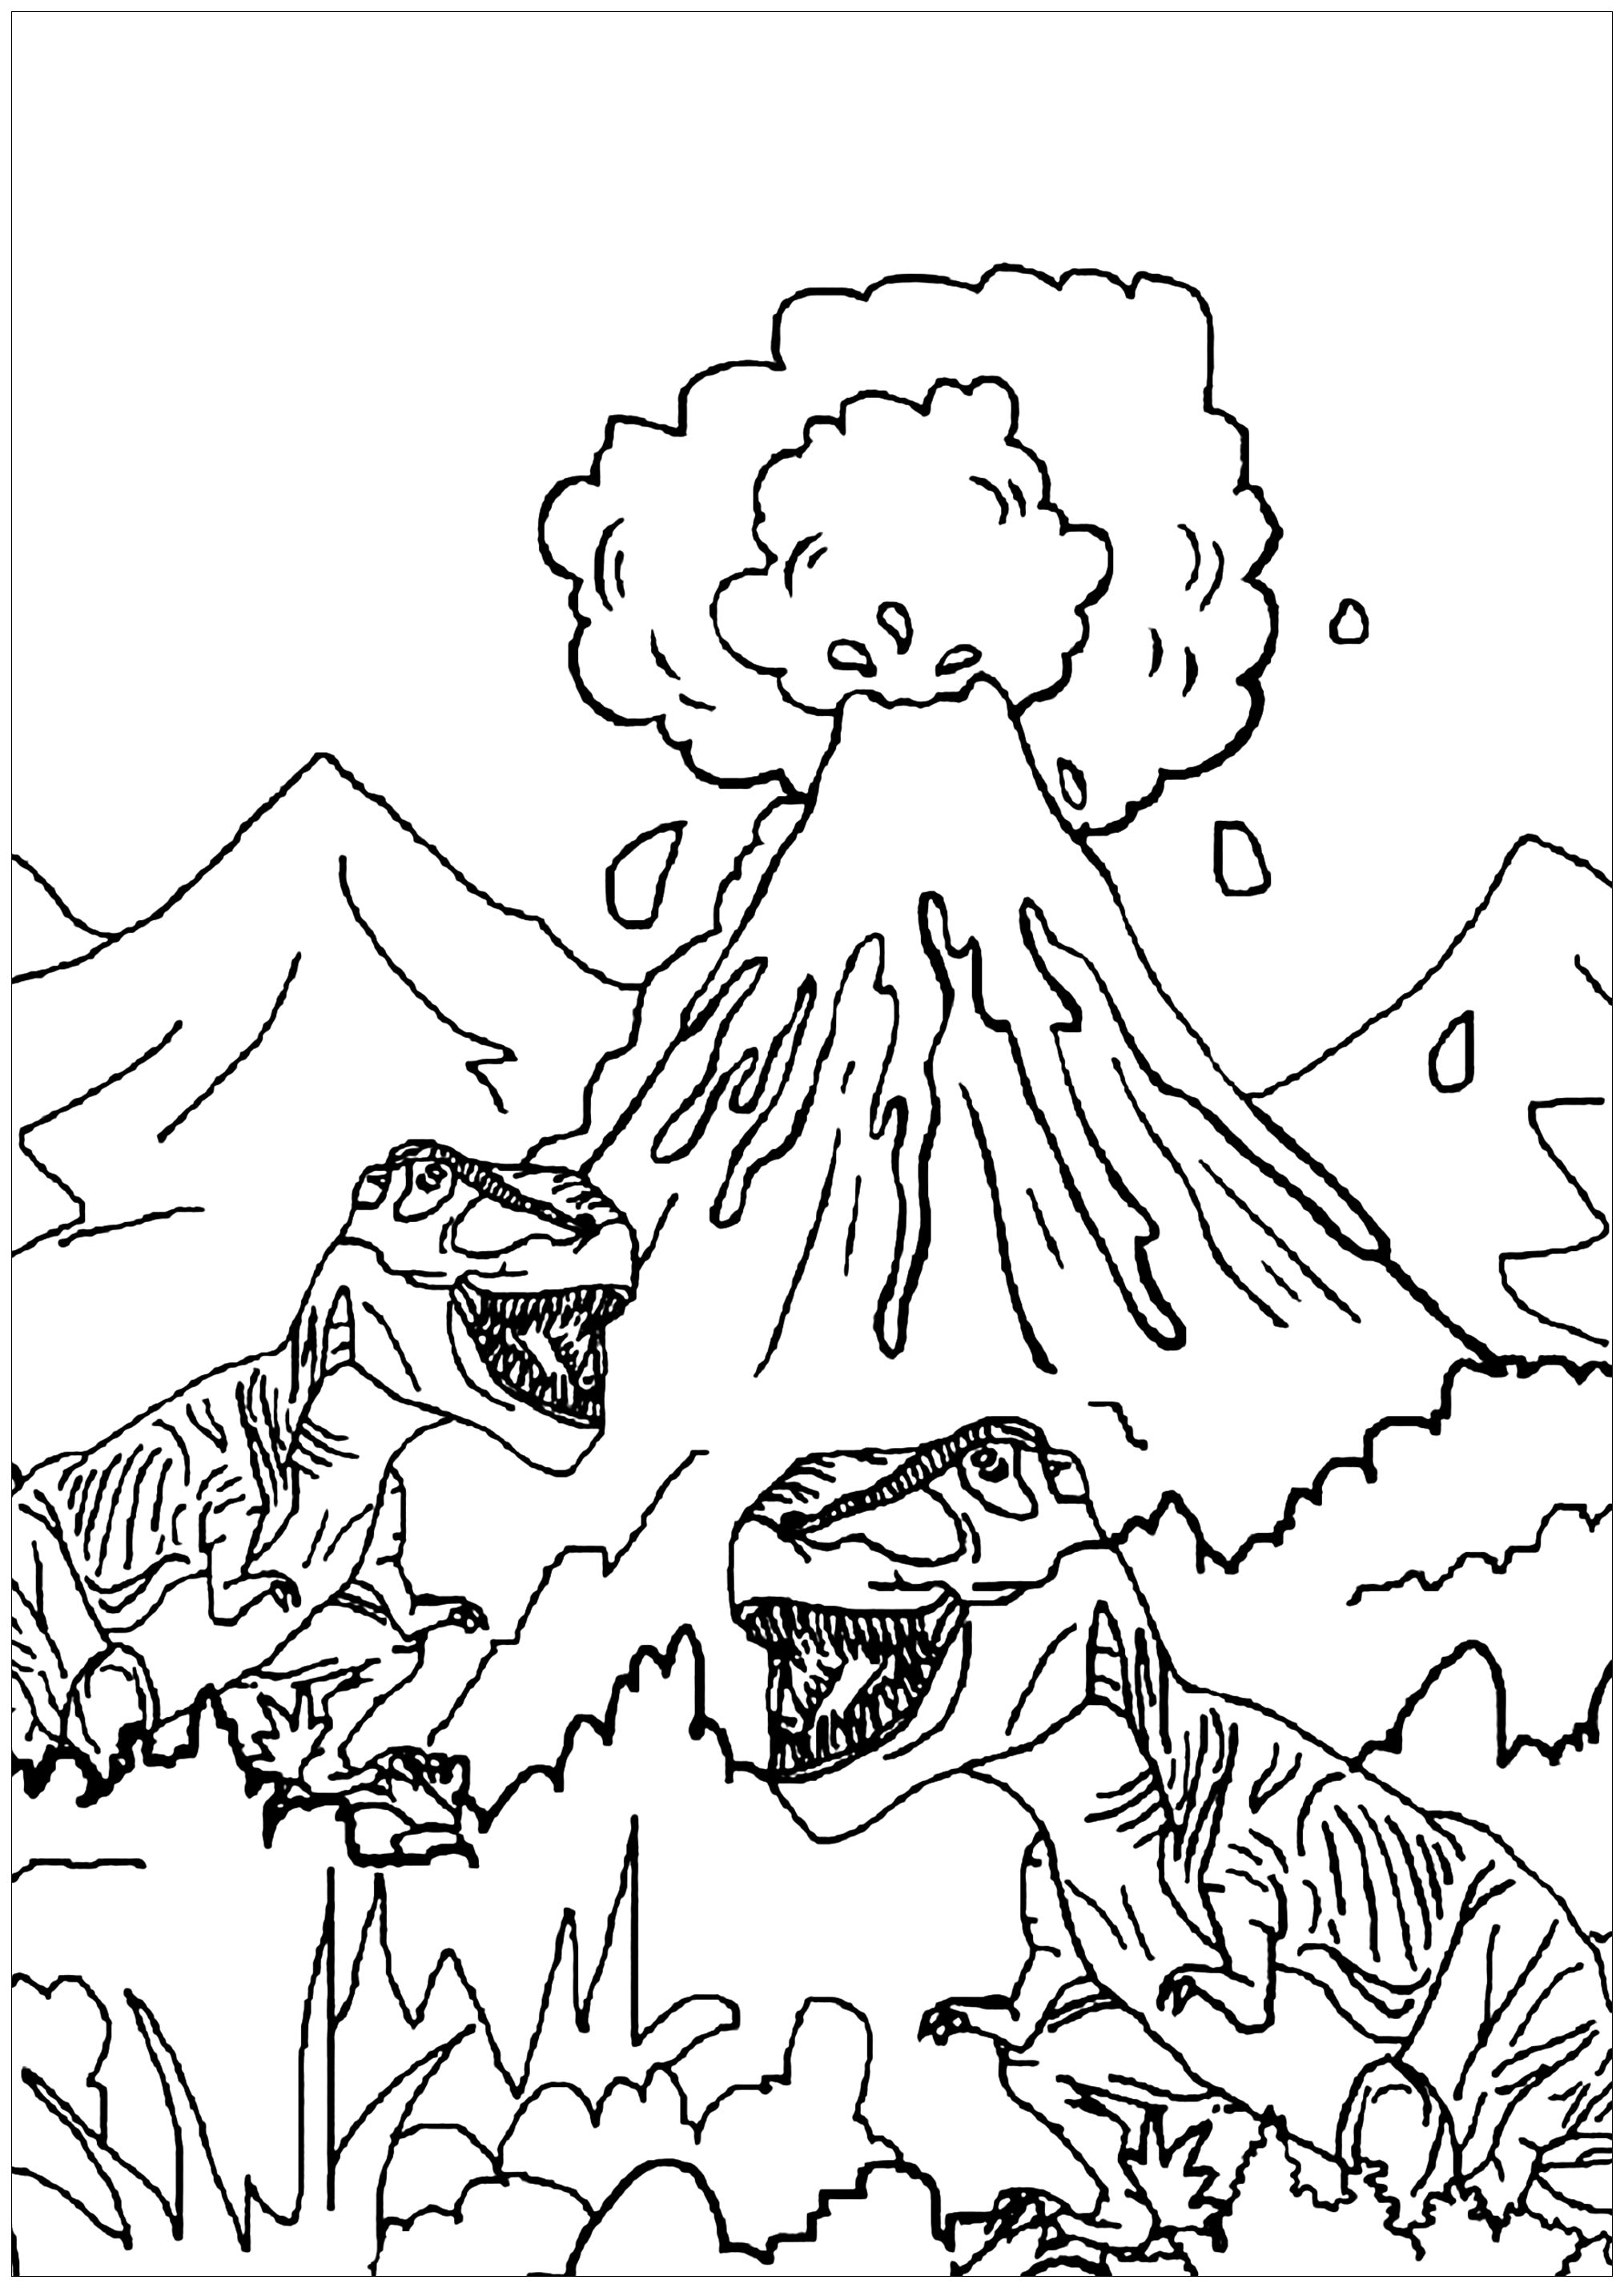  Dinosaurs  to print for free Dinosaurs  and volcano 